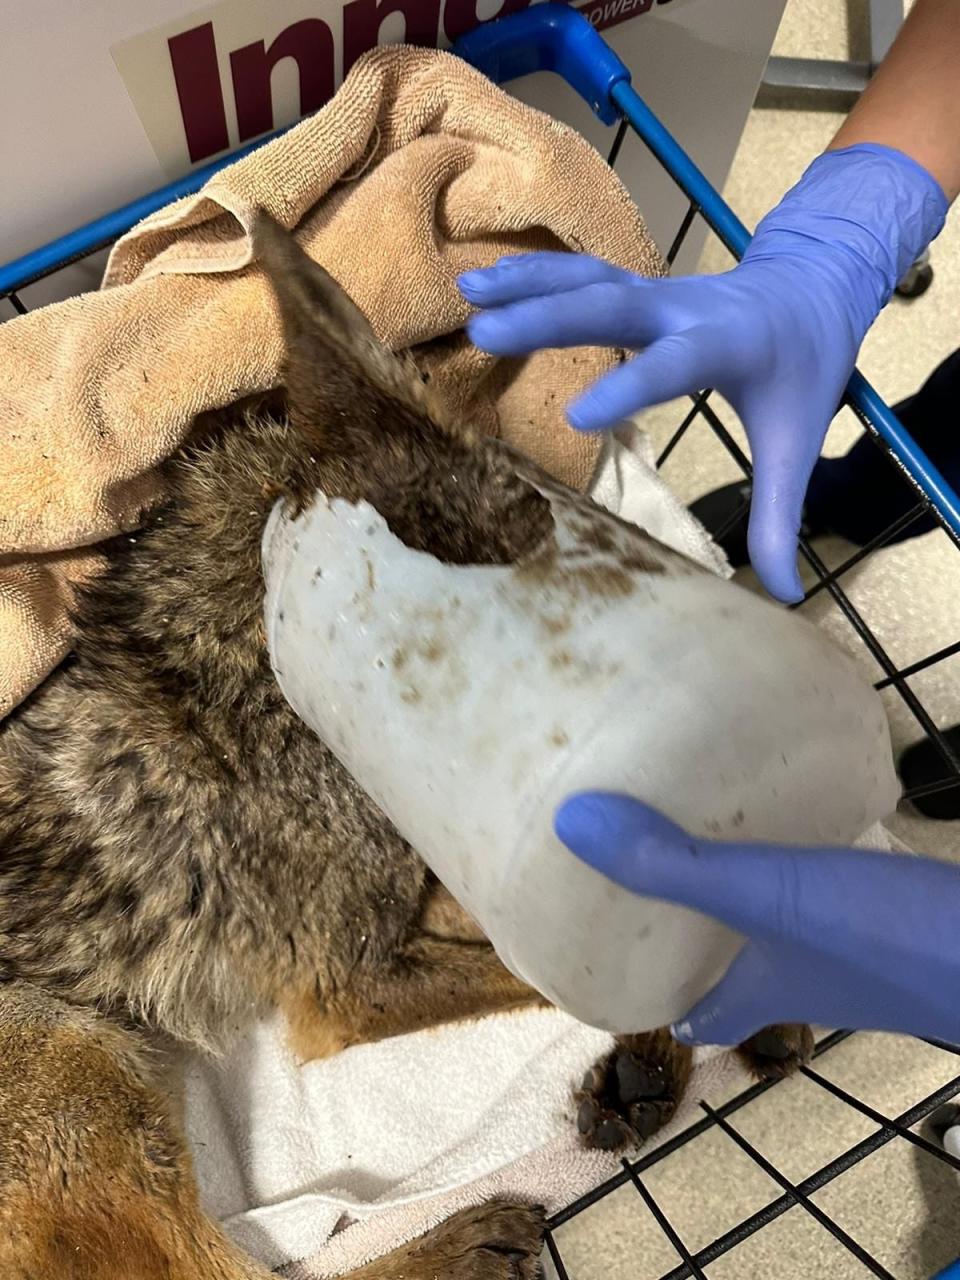 A coyote is recovering at San Diego Humane Society’s Ramona Wildlife Center after being rescued from a flooded field full of debris with a bucket stuck on his head.